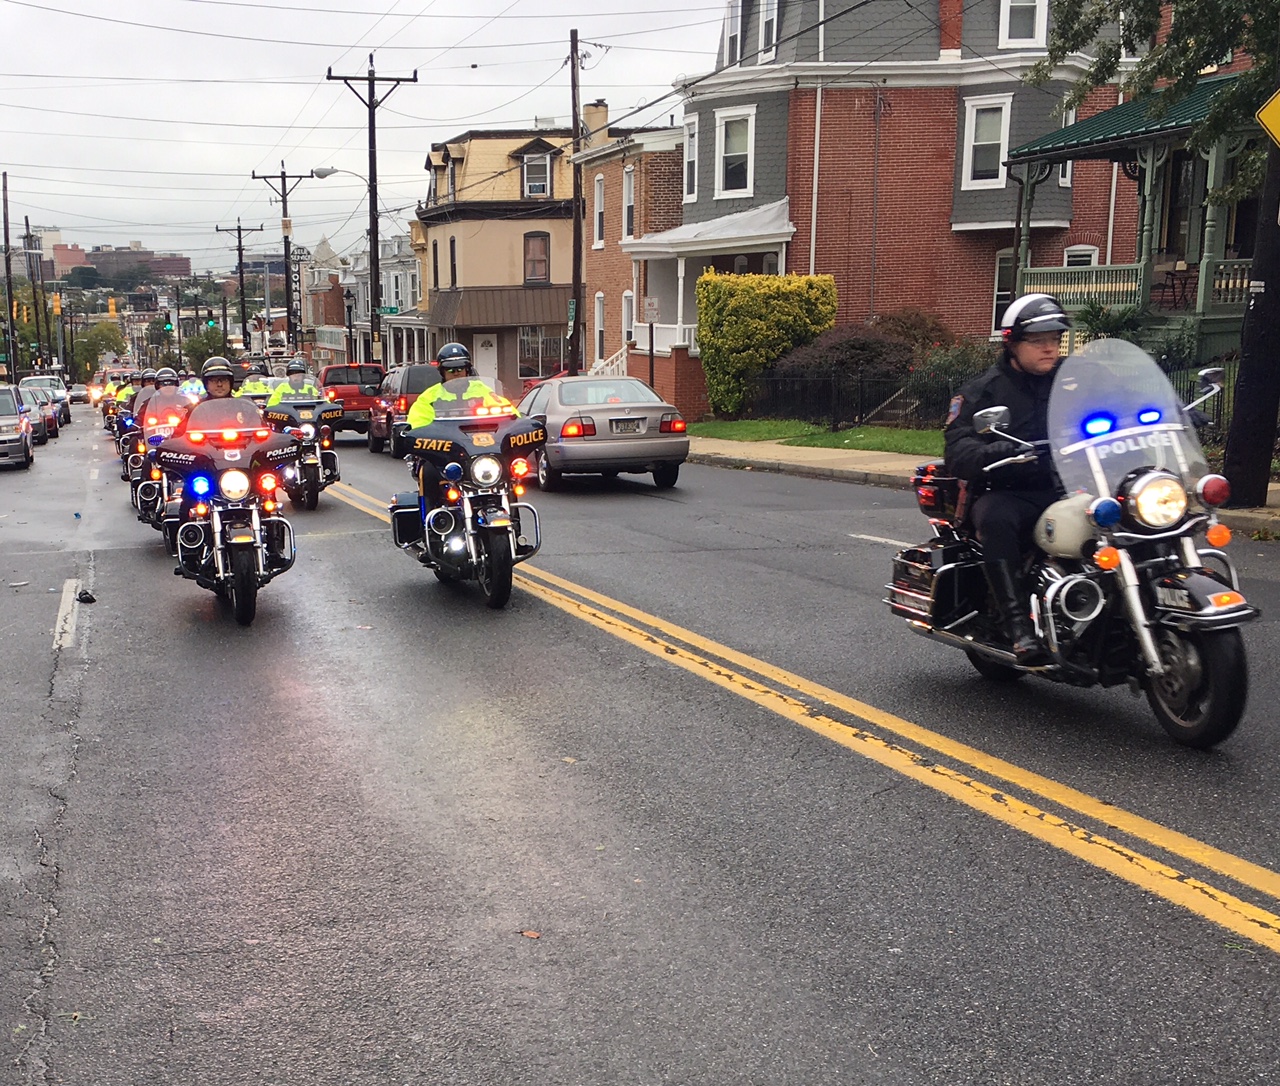 A funeral service for  Lt. Christopher Leach was held today at St. Elizabeth’s Catholic Church in Wilmington. (Photo: Delaware Free News)